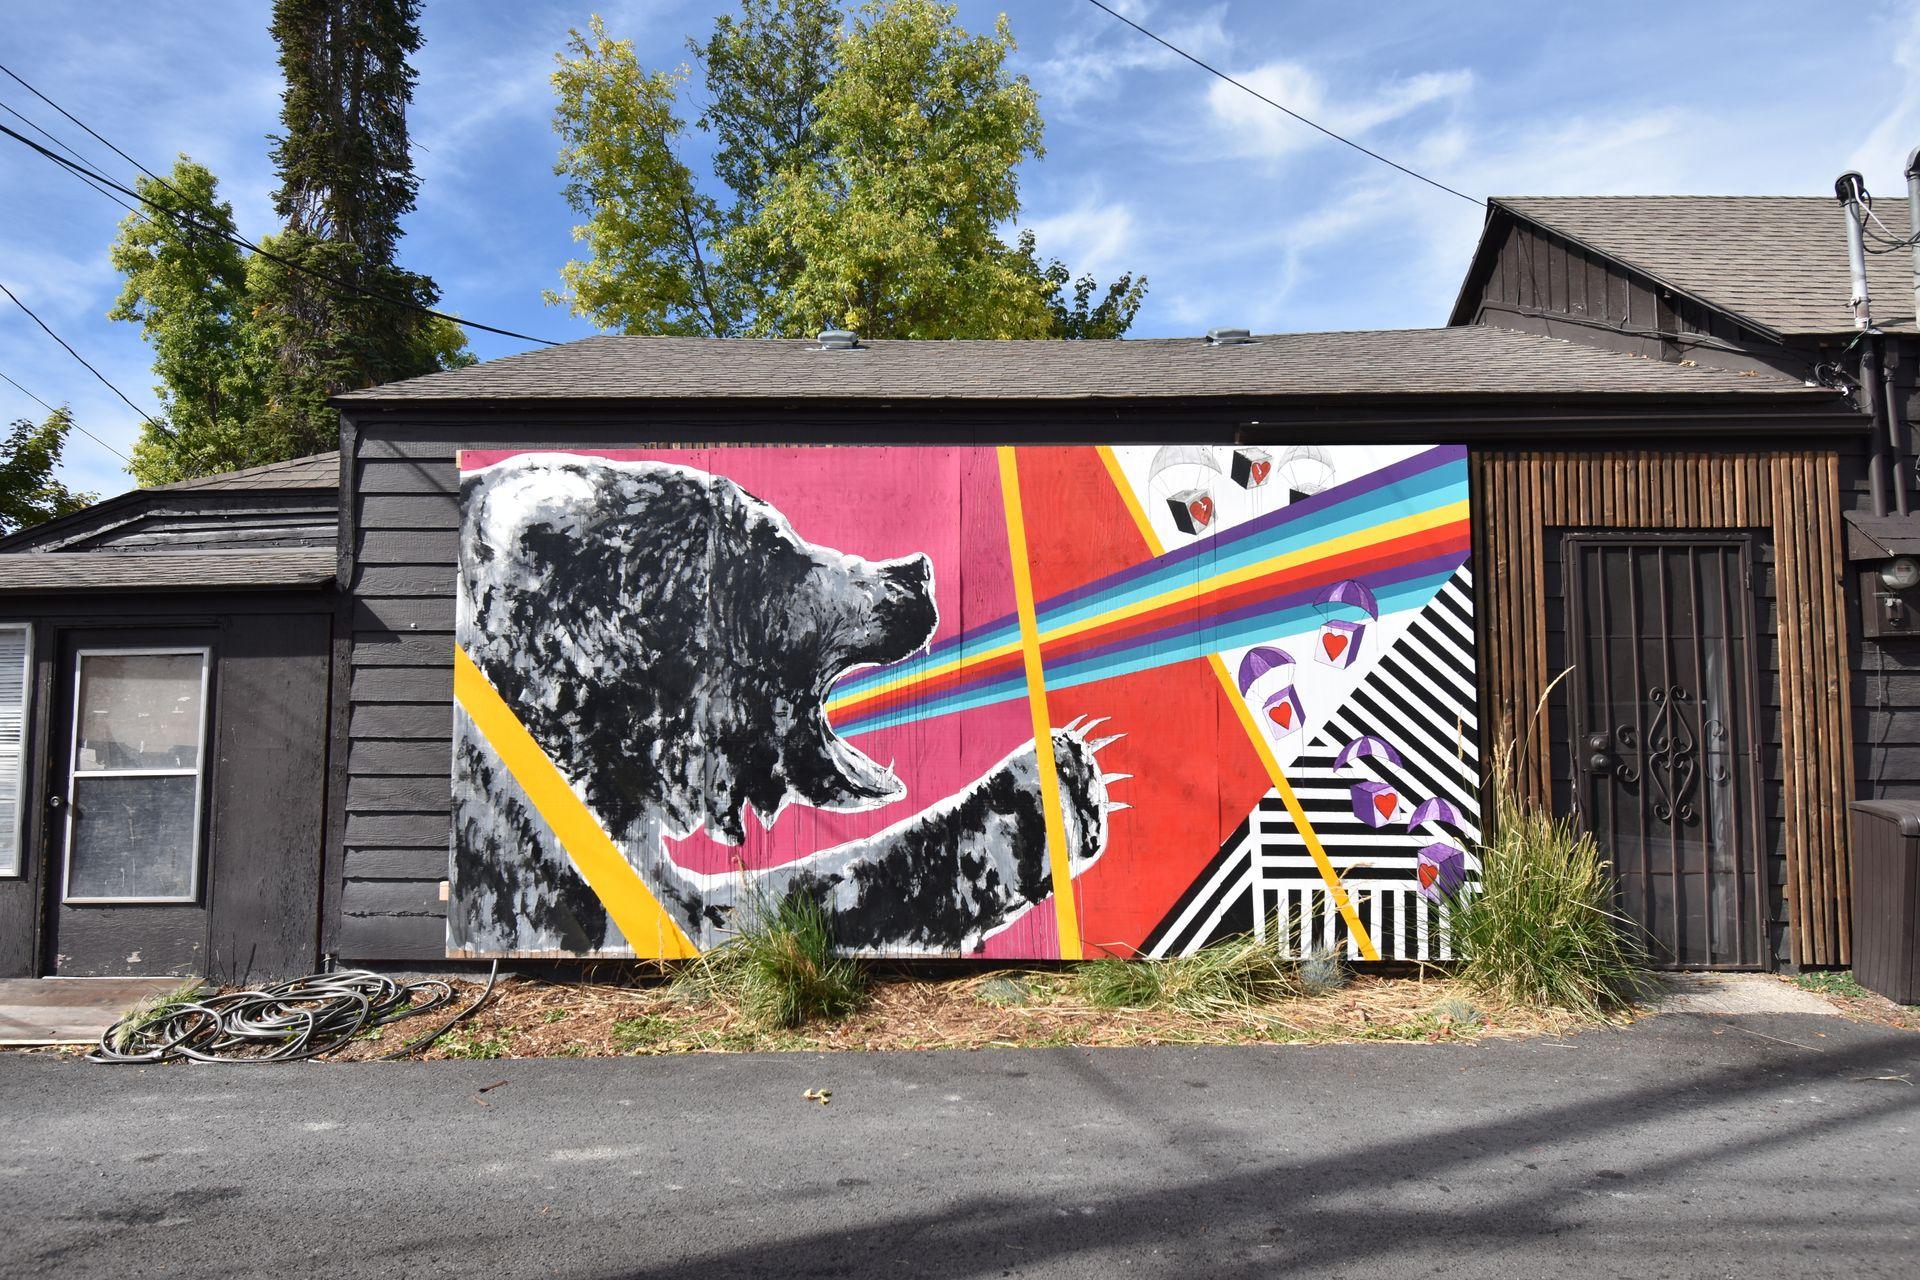 A mural of a bear with a rainbow coming out of its mouth. There are pink, red, yellow and black and white geometric shapes surrounding the bear.